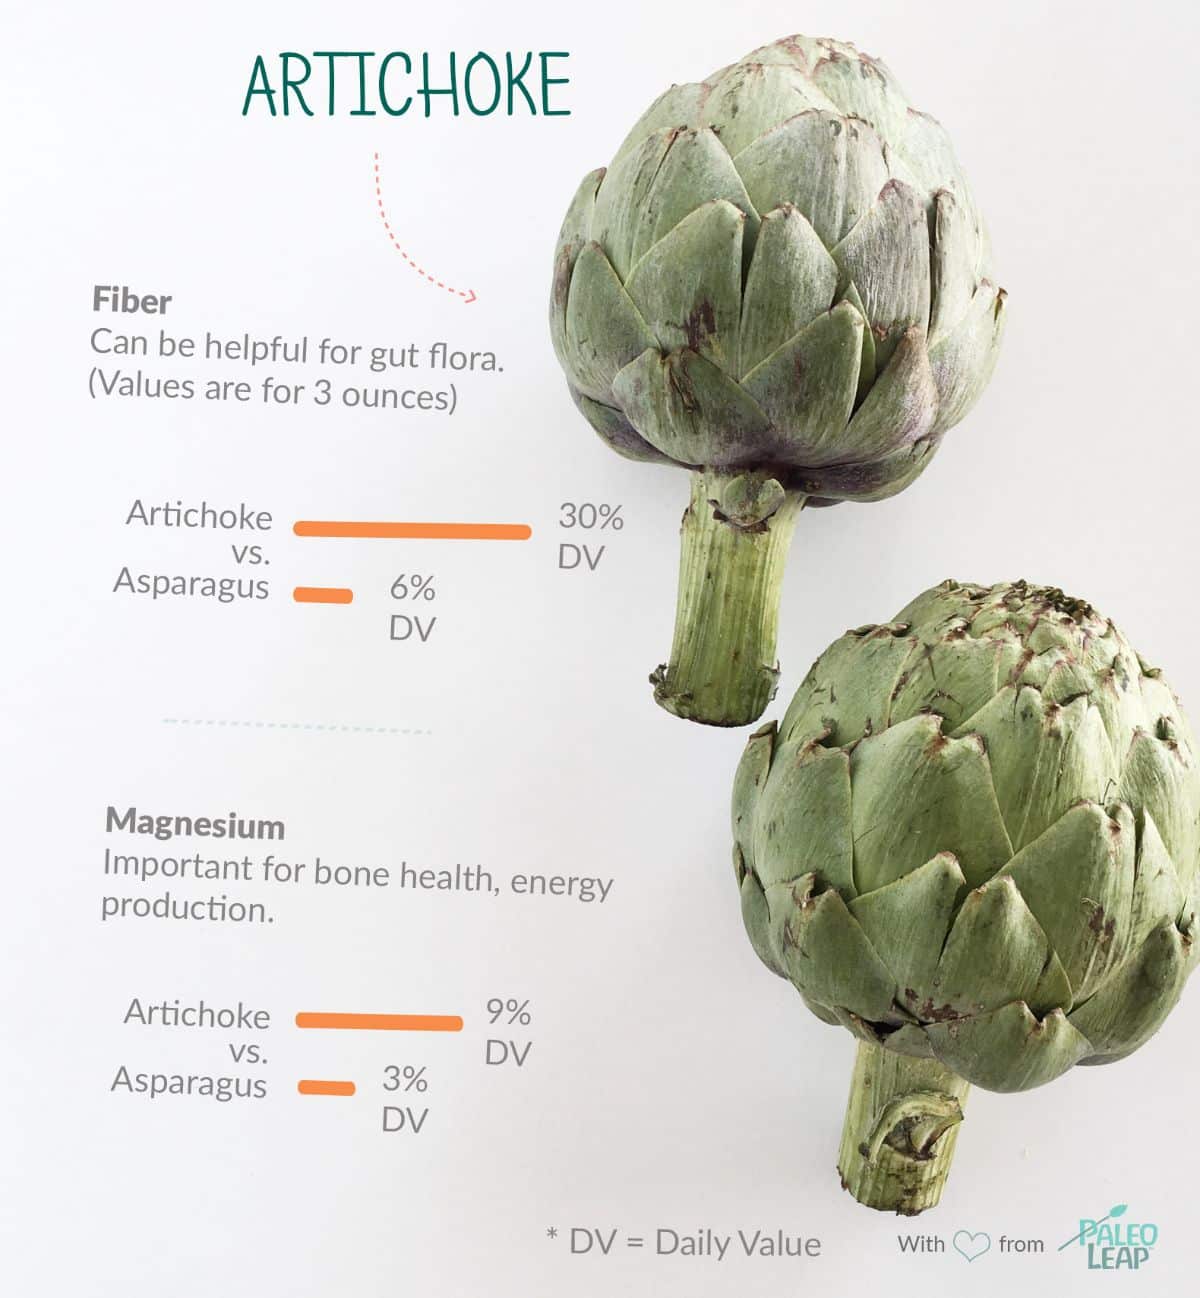 completed artichoke main